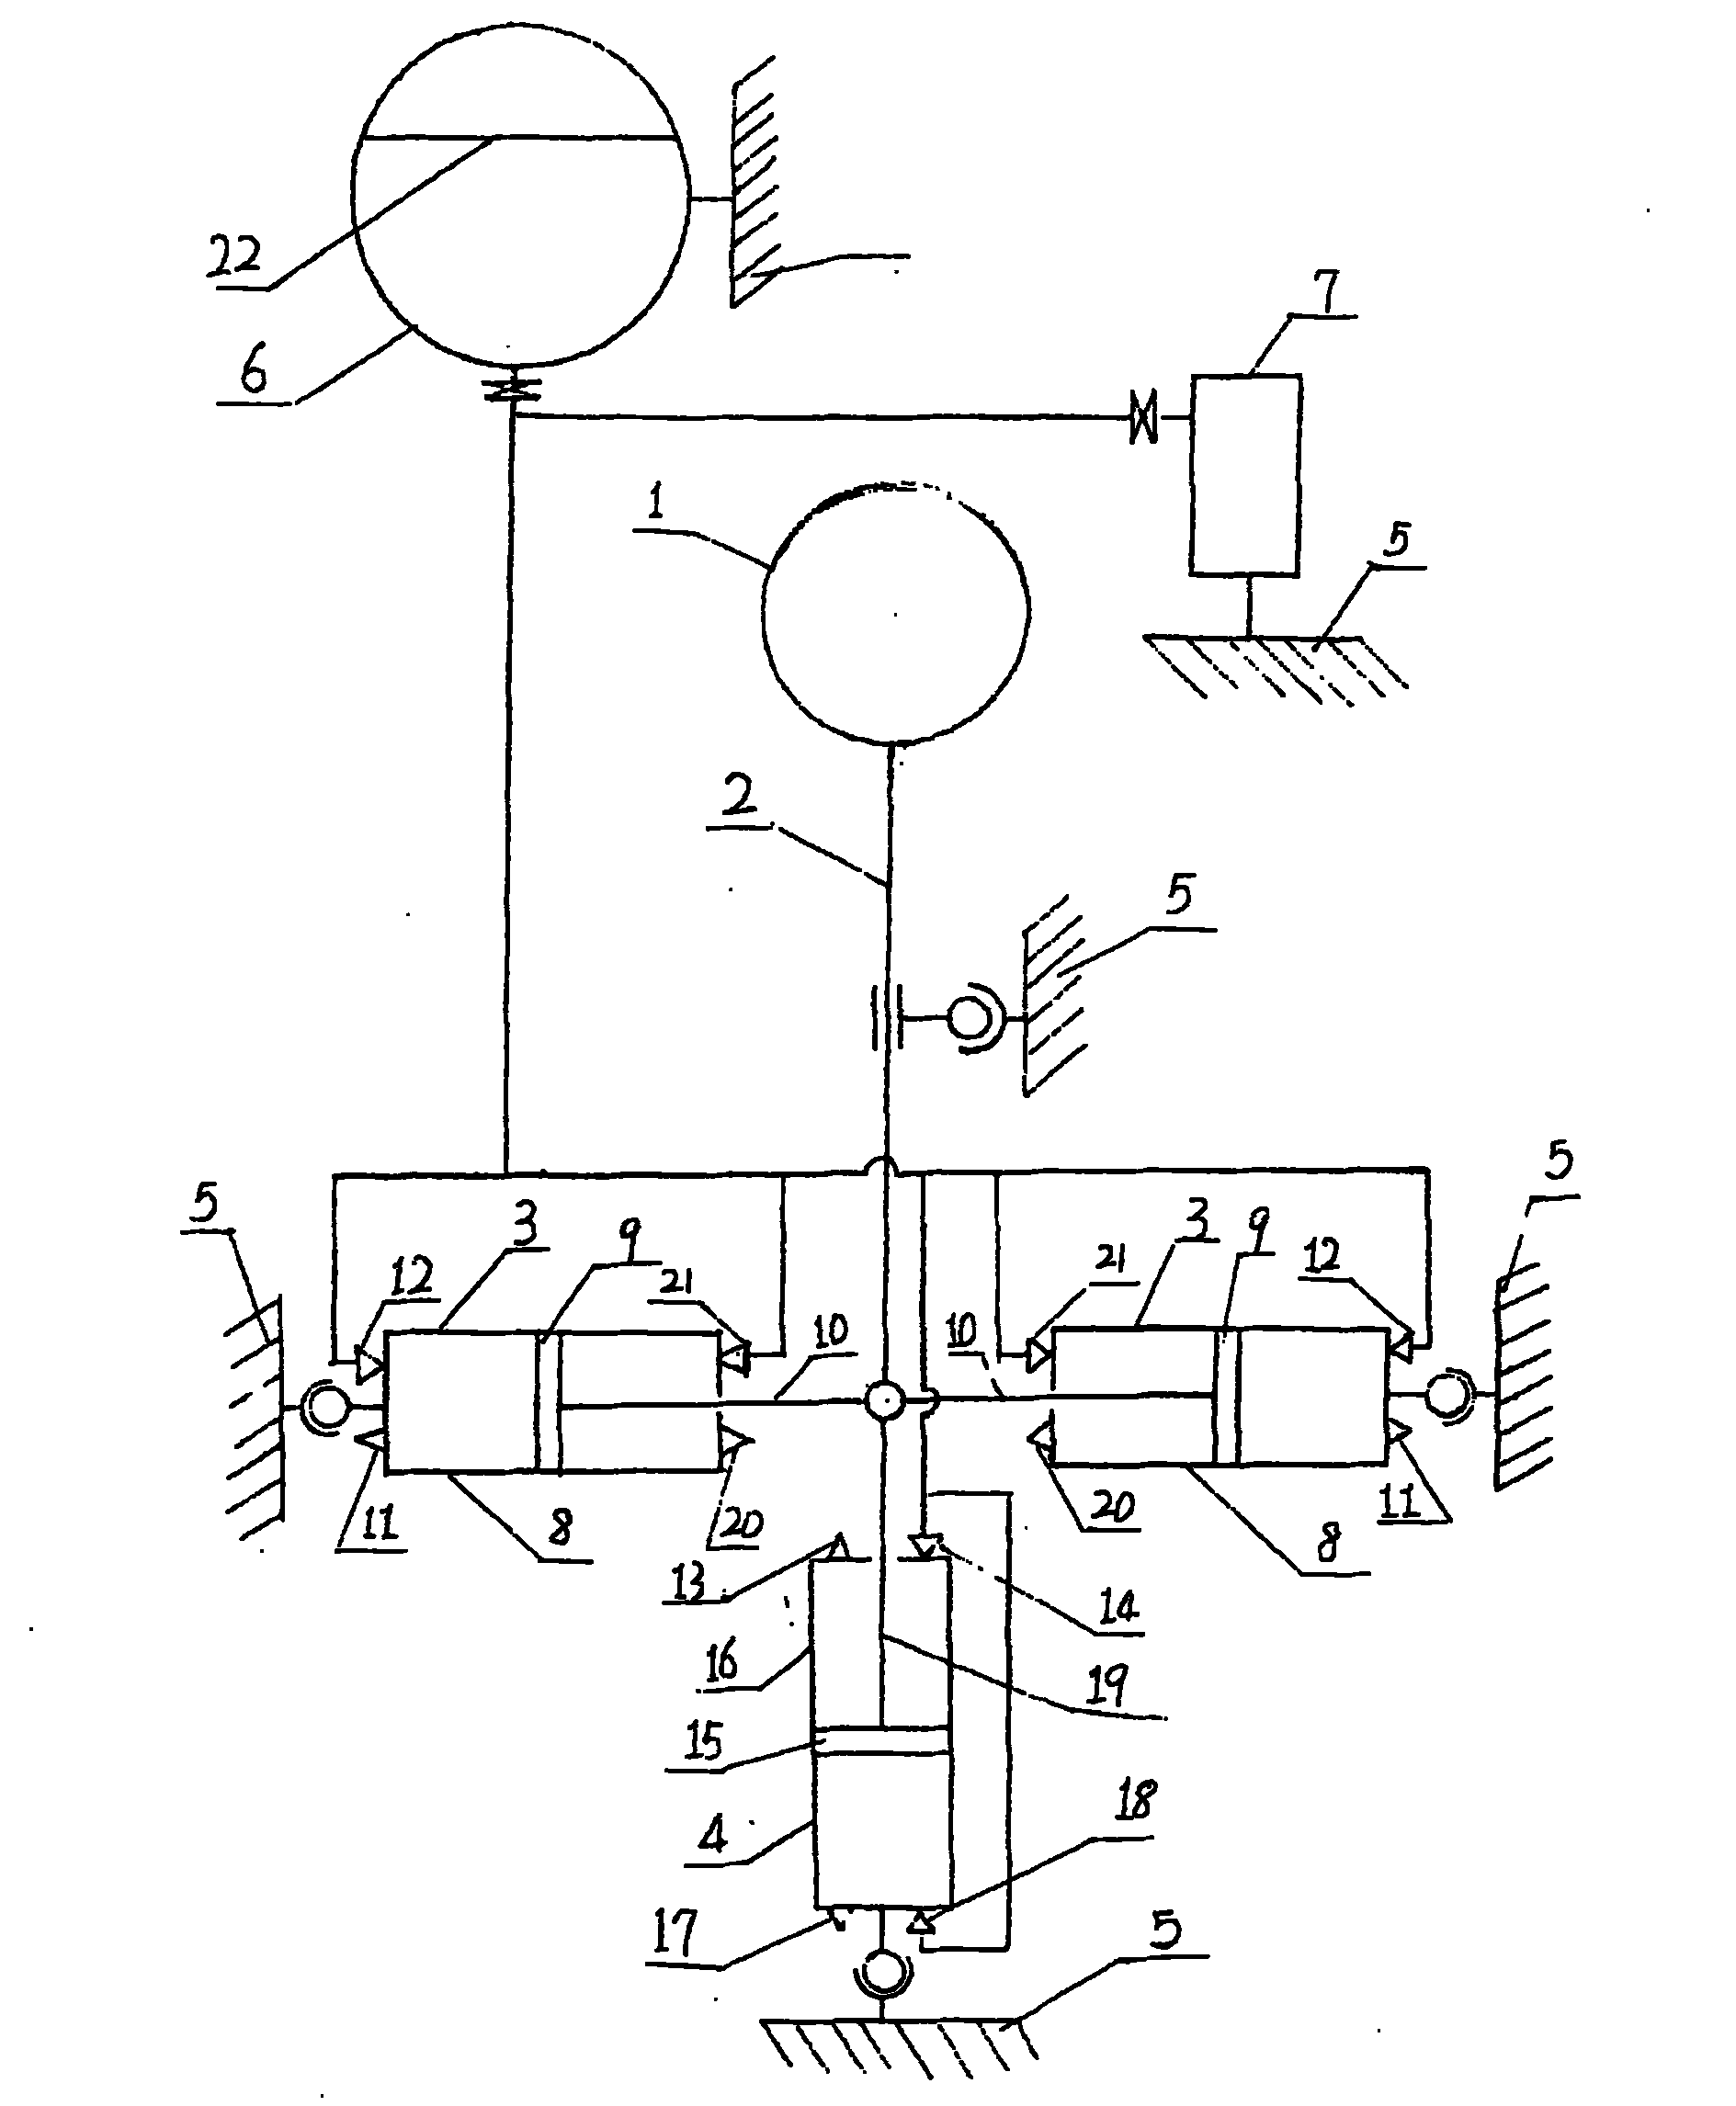 Wave power generating device